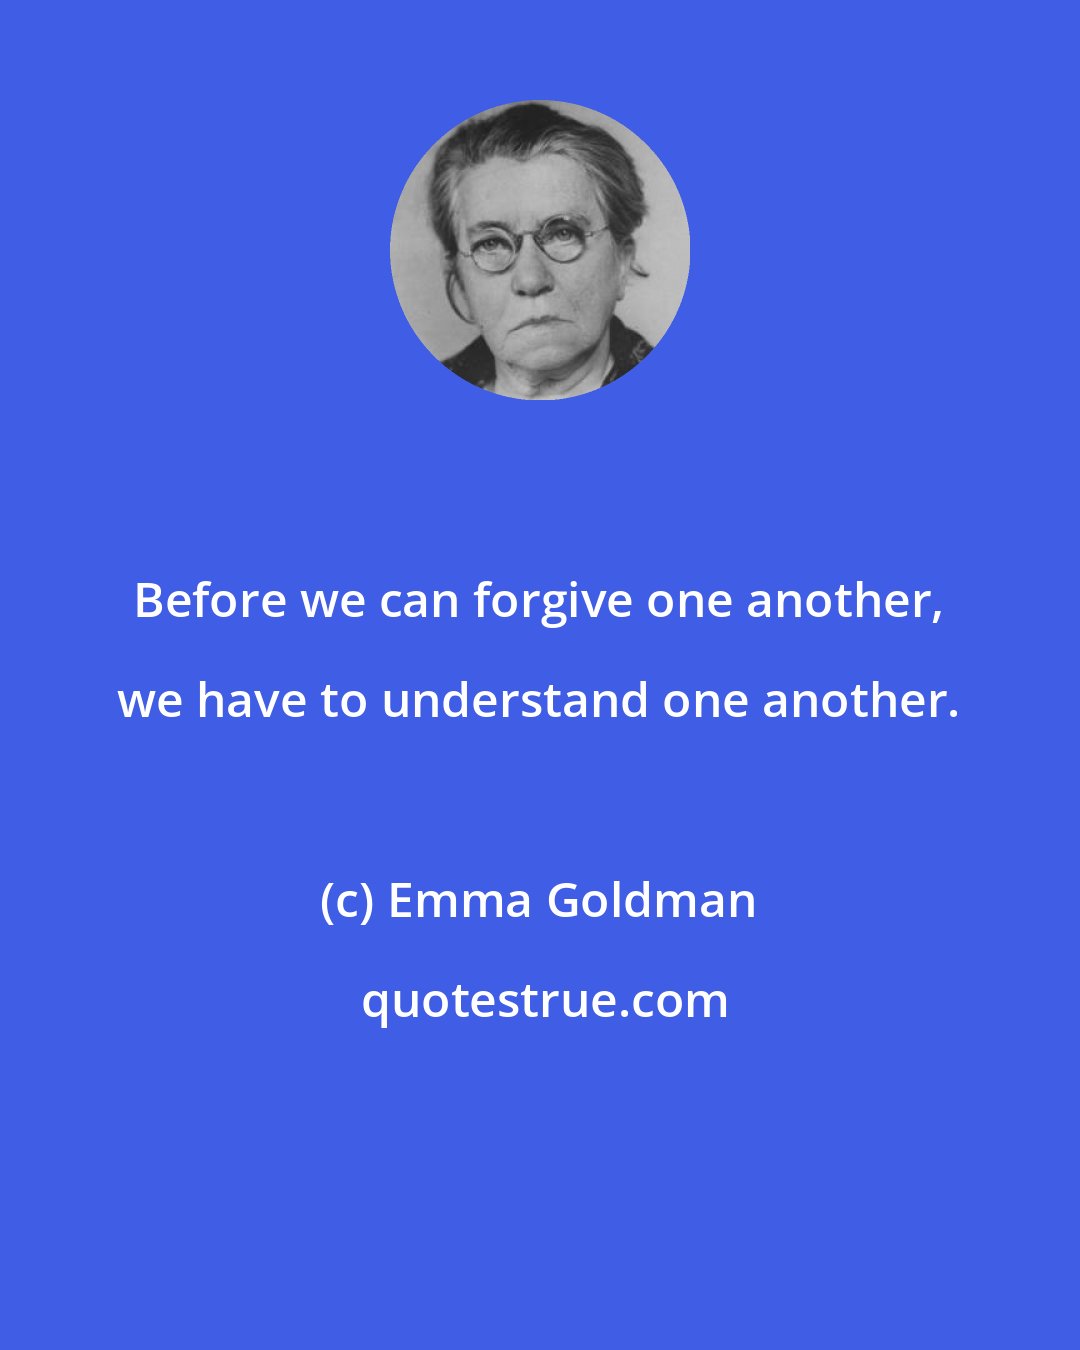 Emma Goldman: Before we can forgive one another, we have to understand one another.